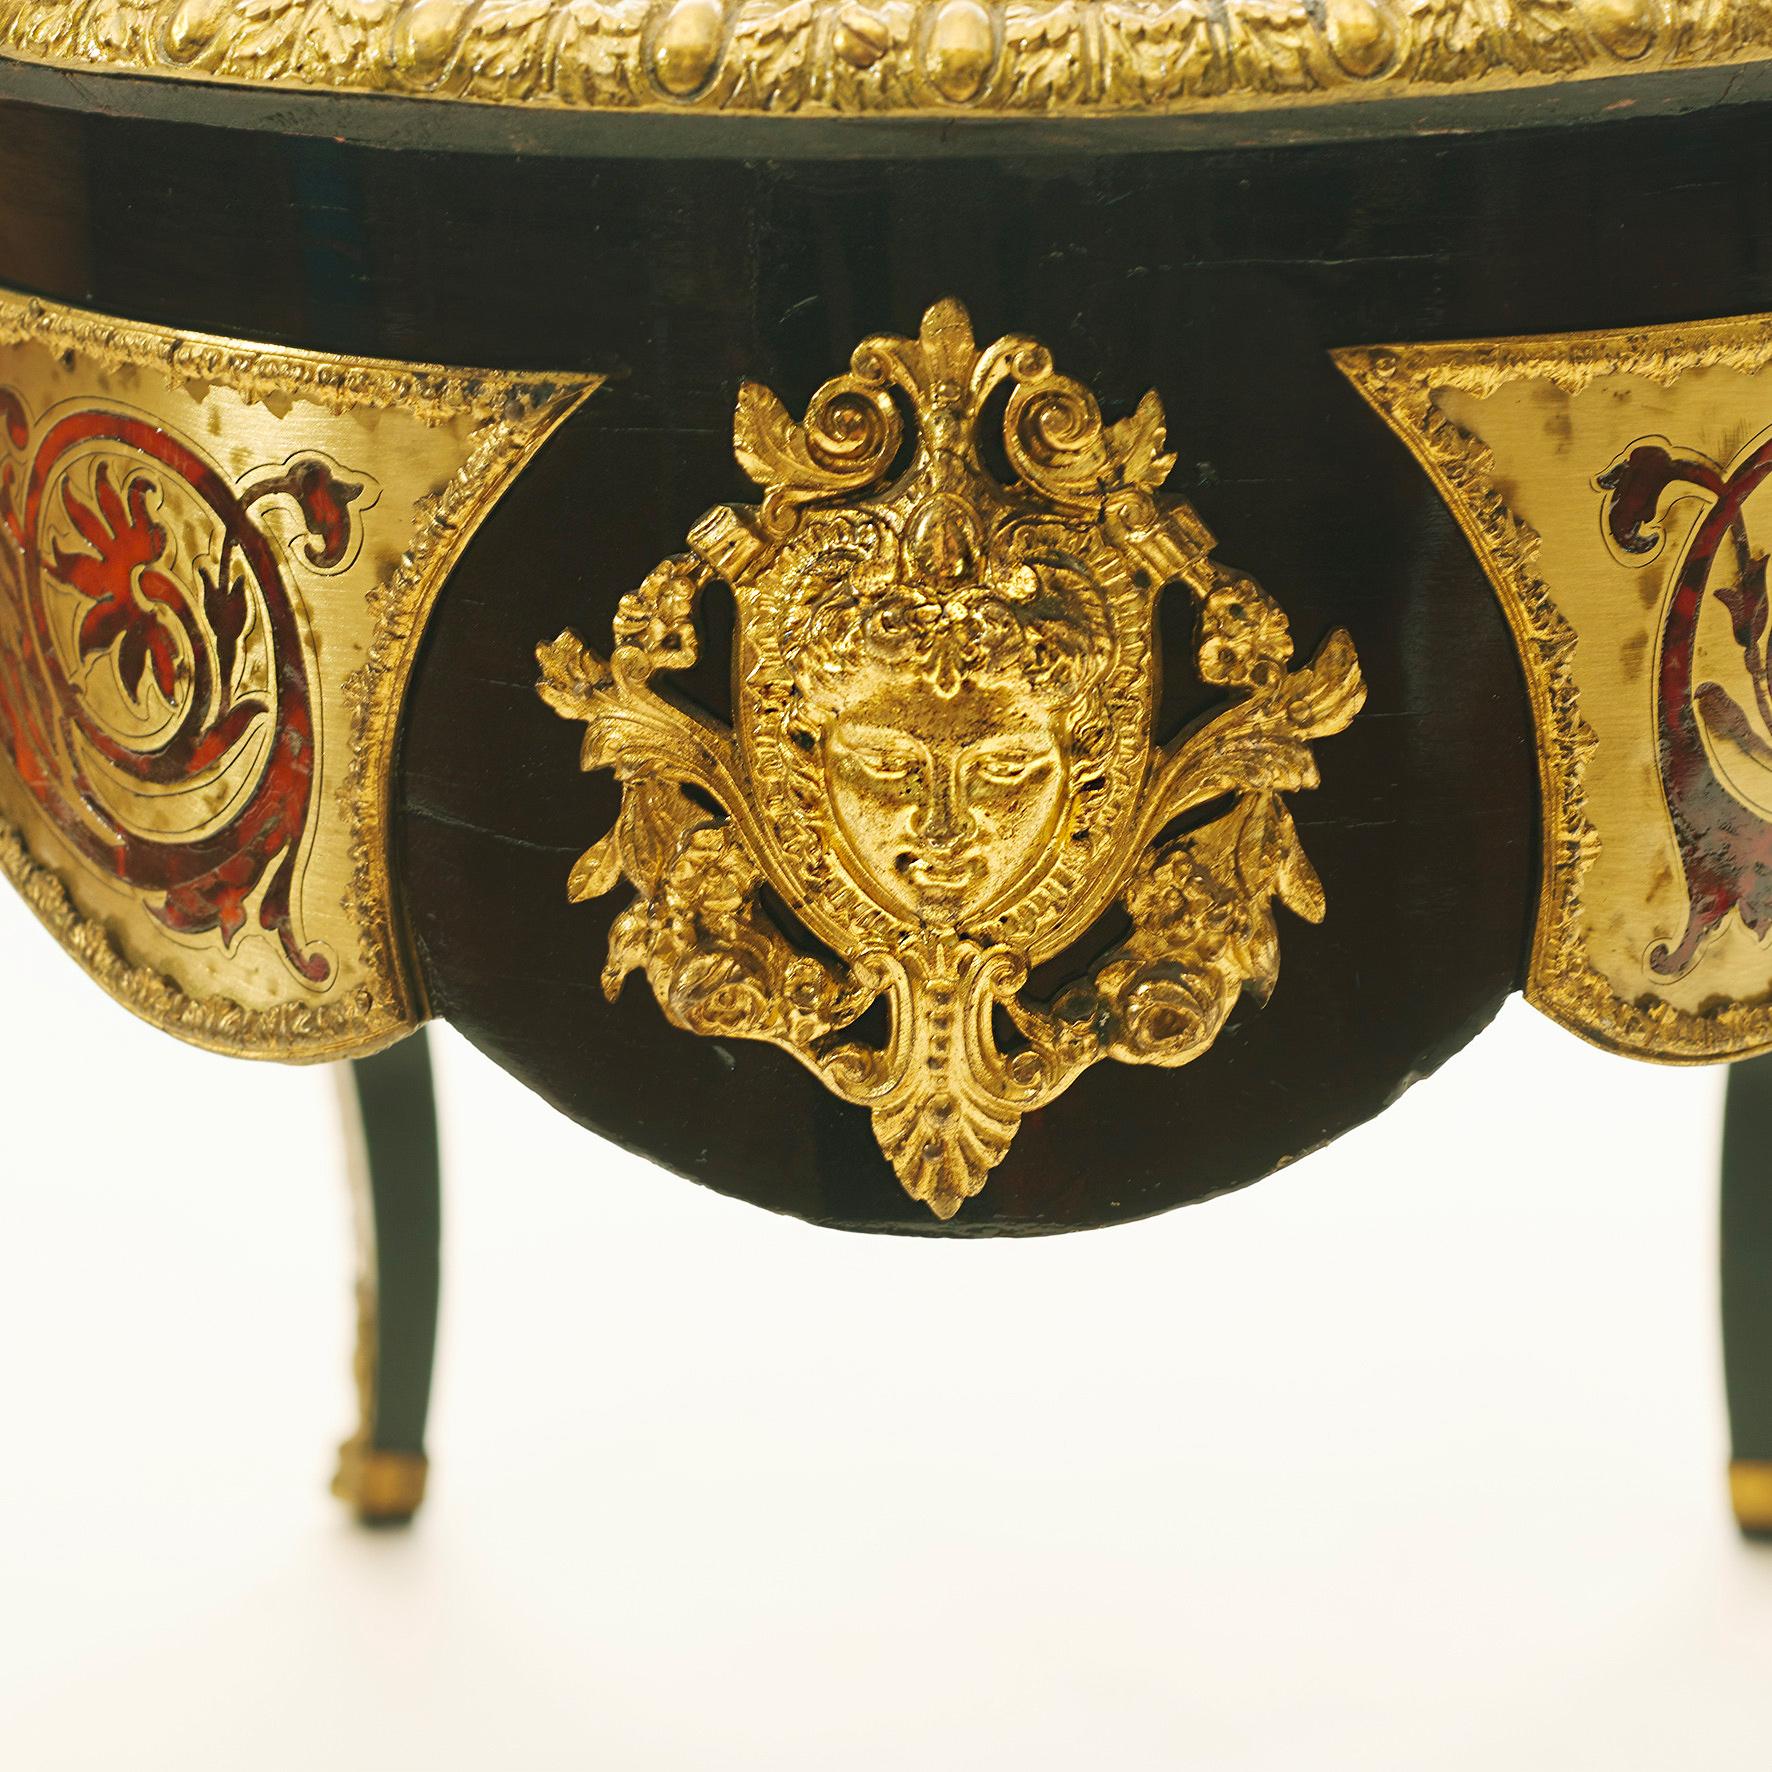 French Napoleon III Table in the Manner of Boulle tortoiseshell and Brass In Good Condition For Sale In Kastrup, DK